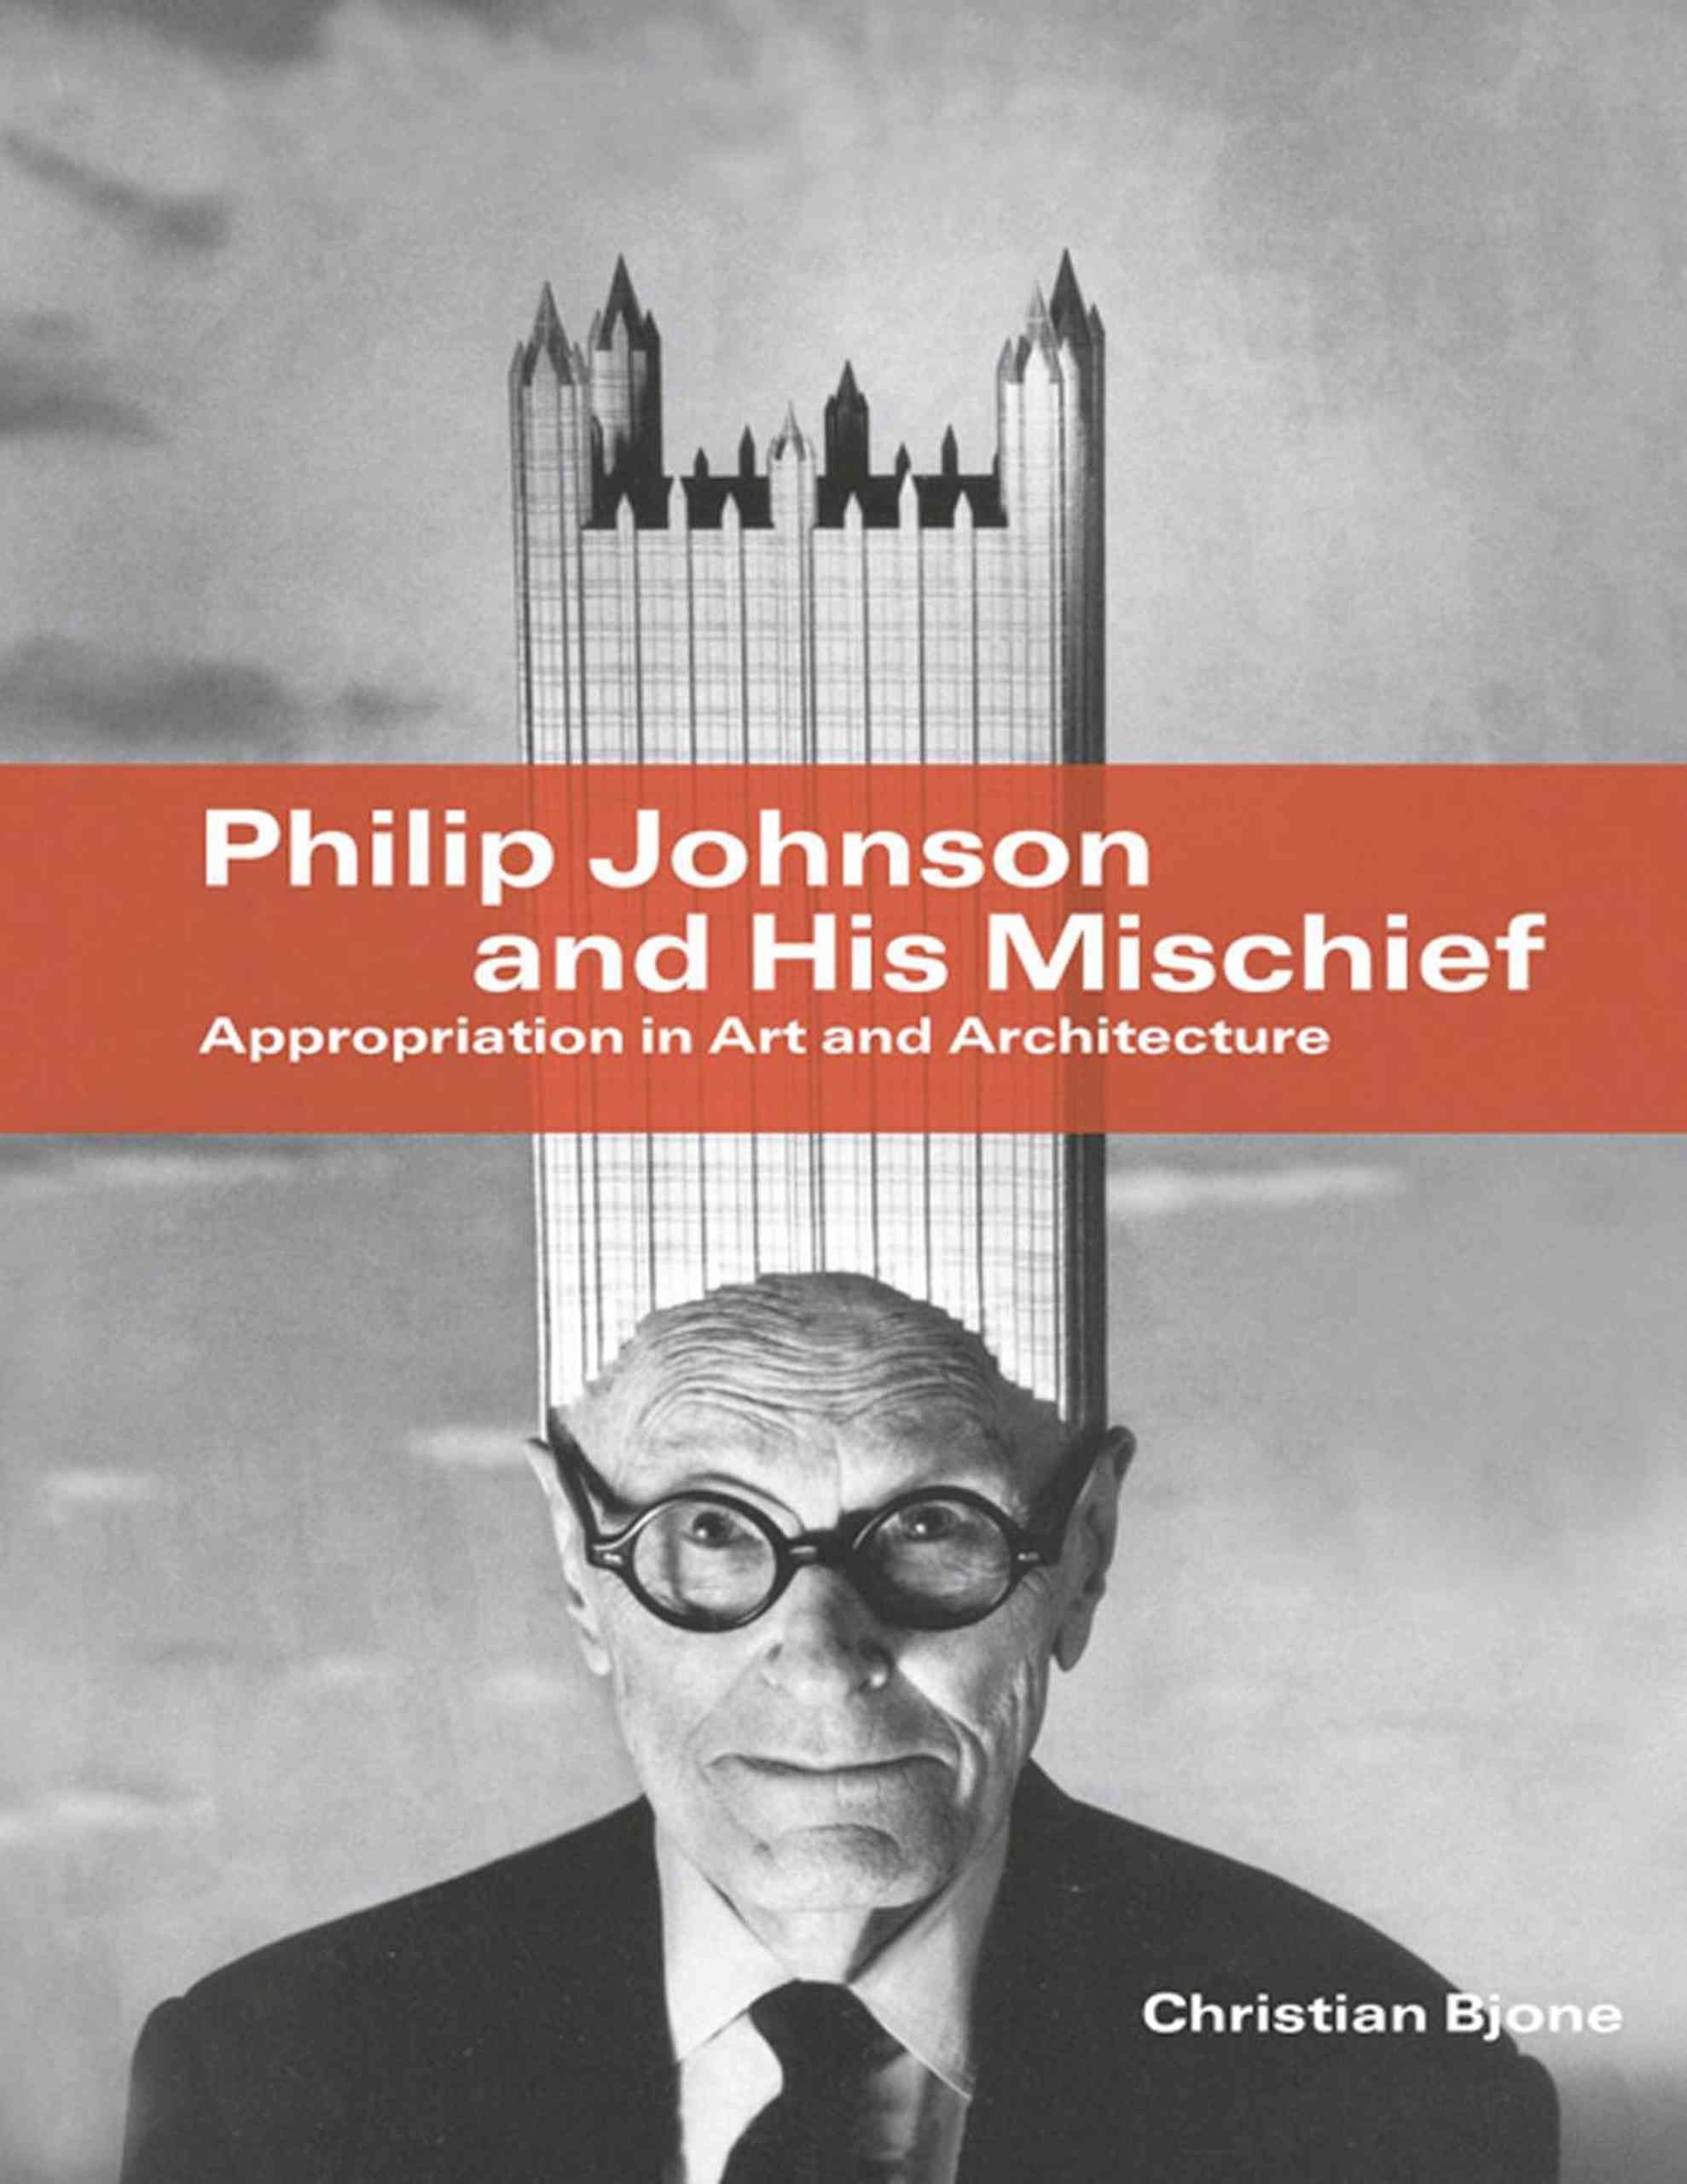 Philip Johnson and His Mischief: Appropriation in Art and